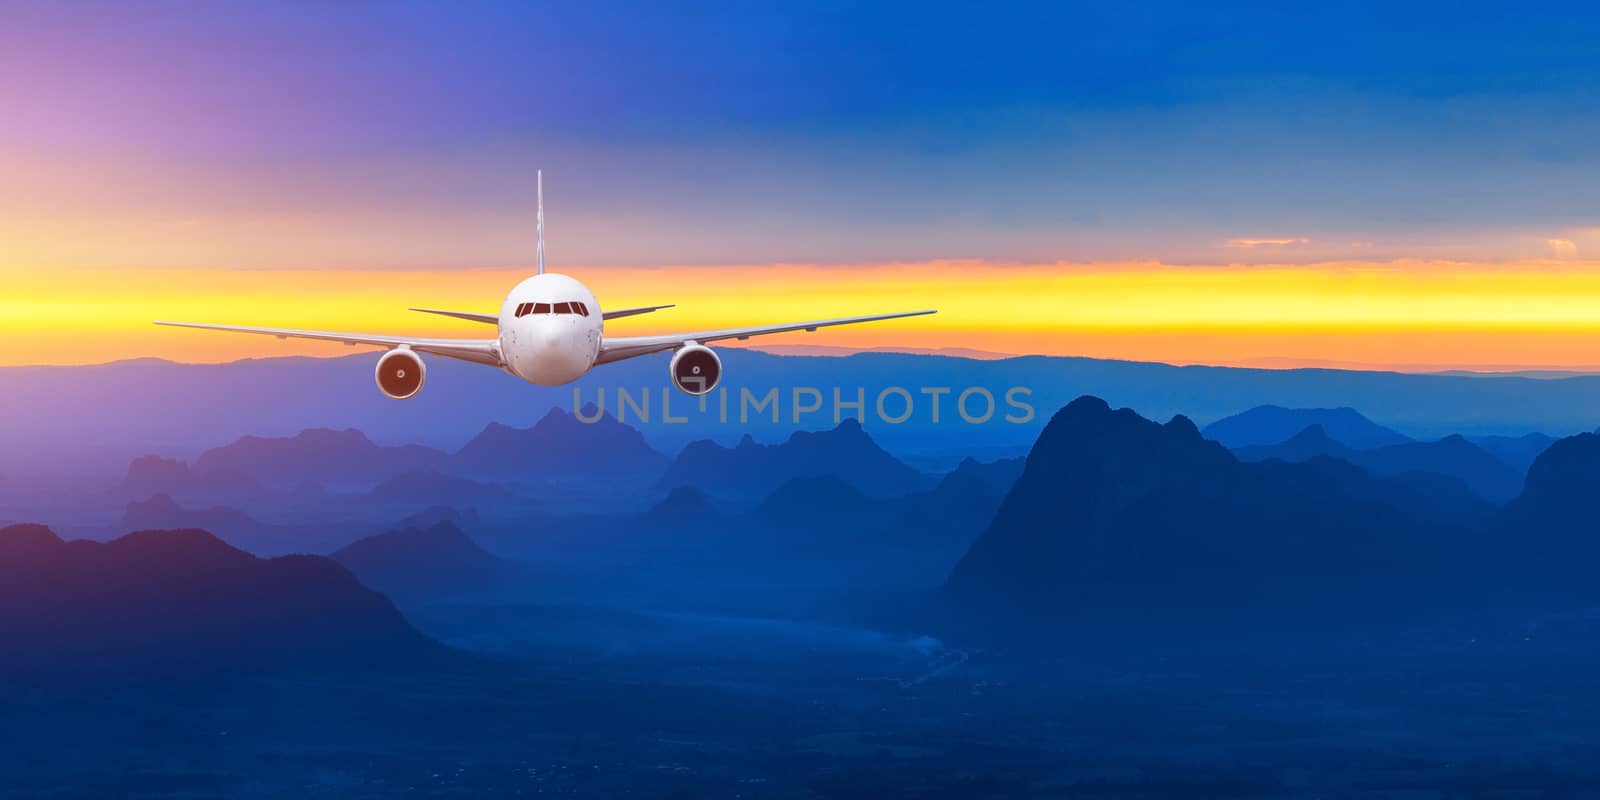 Front of real plane aircraft, isolated on sunset view background